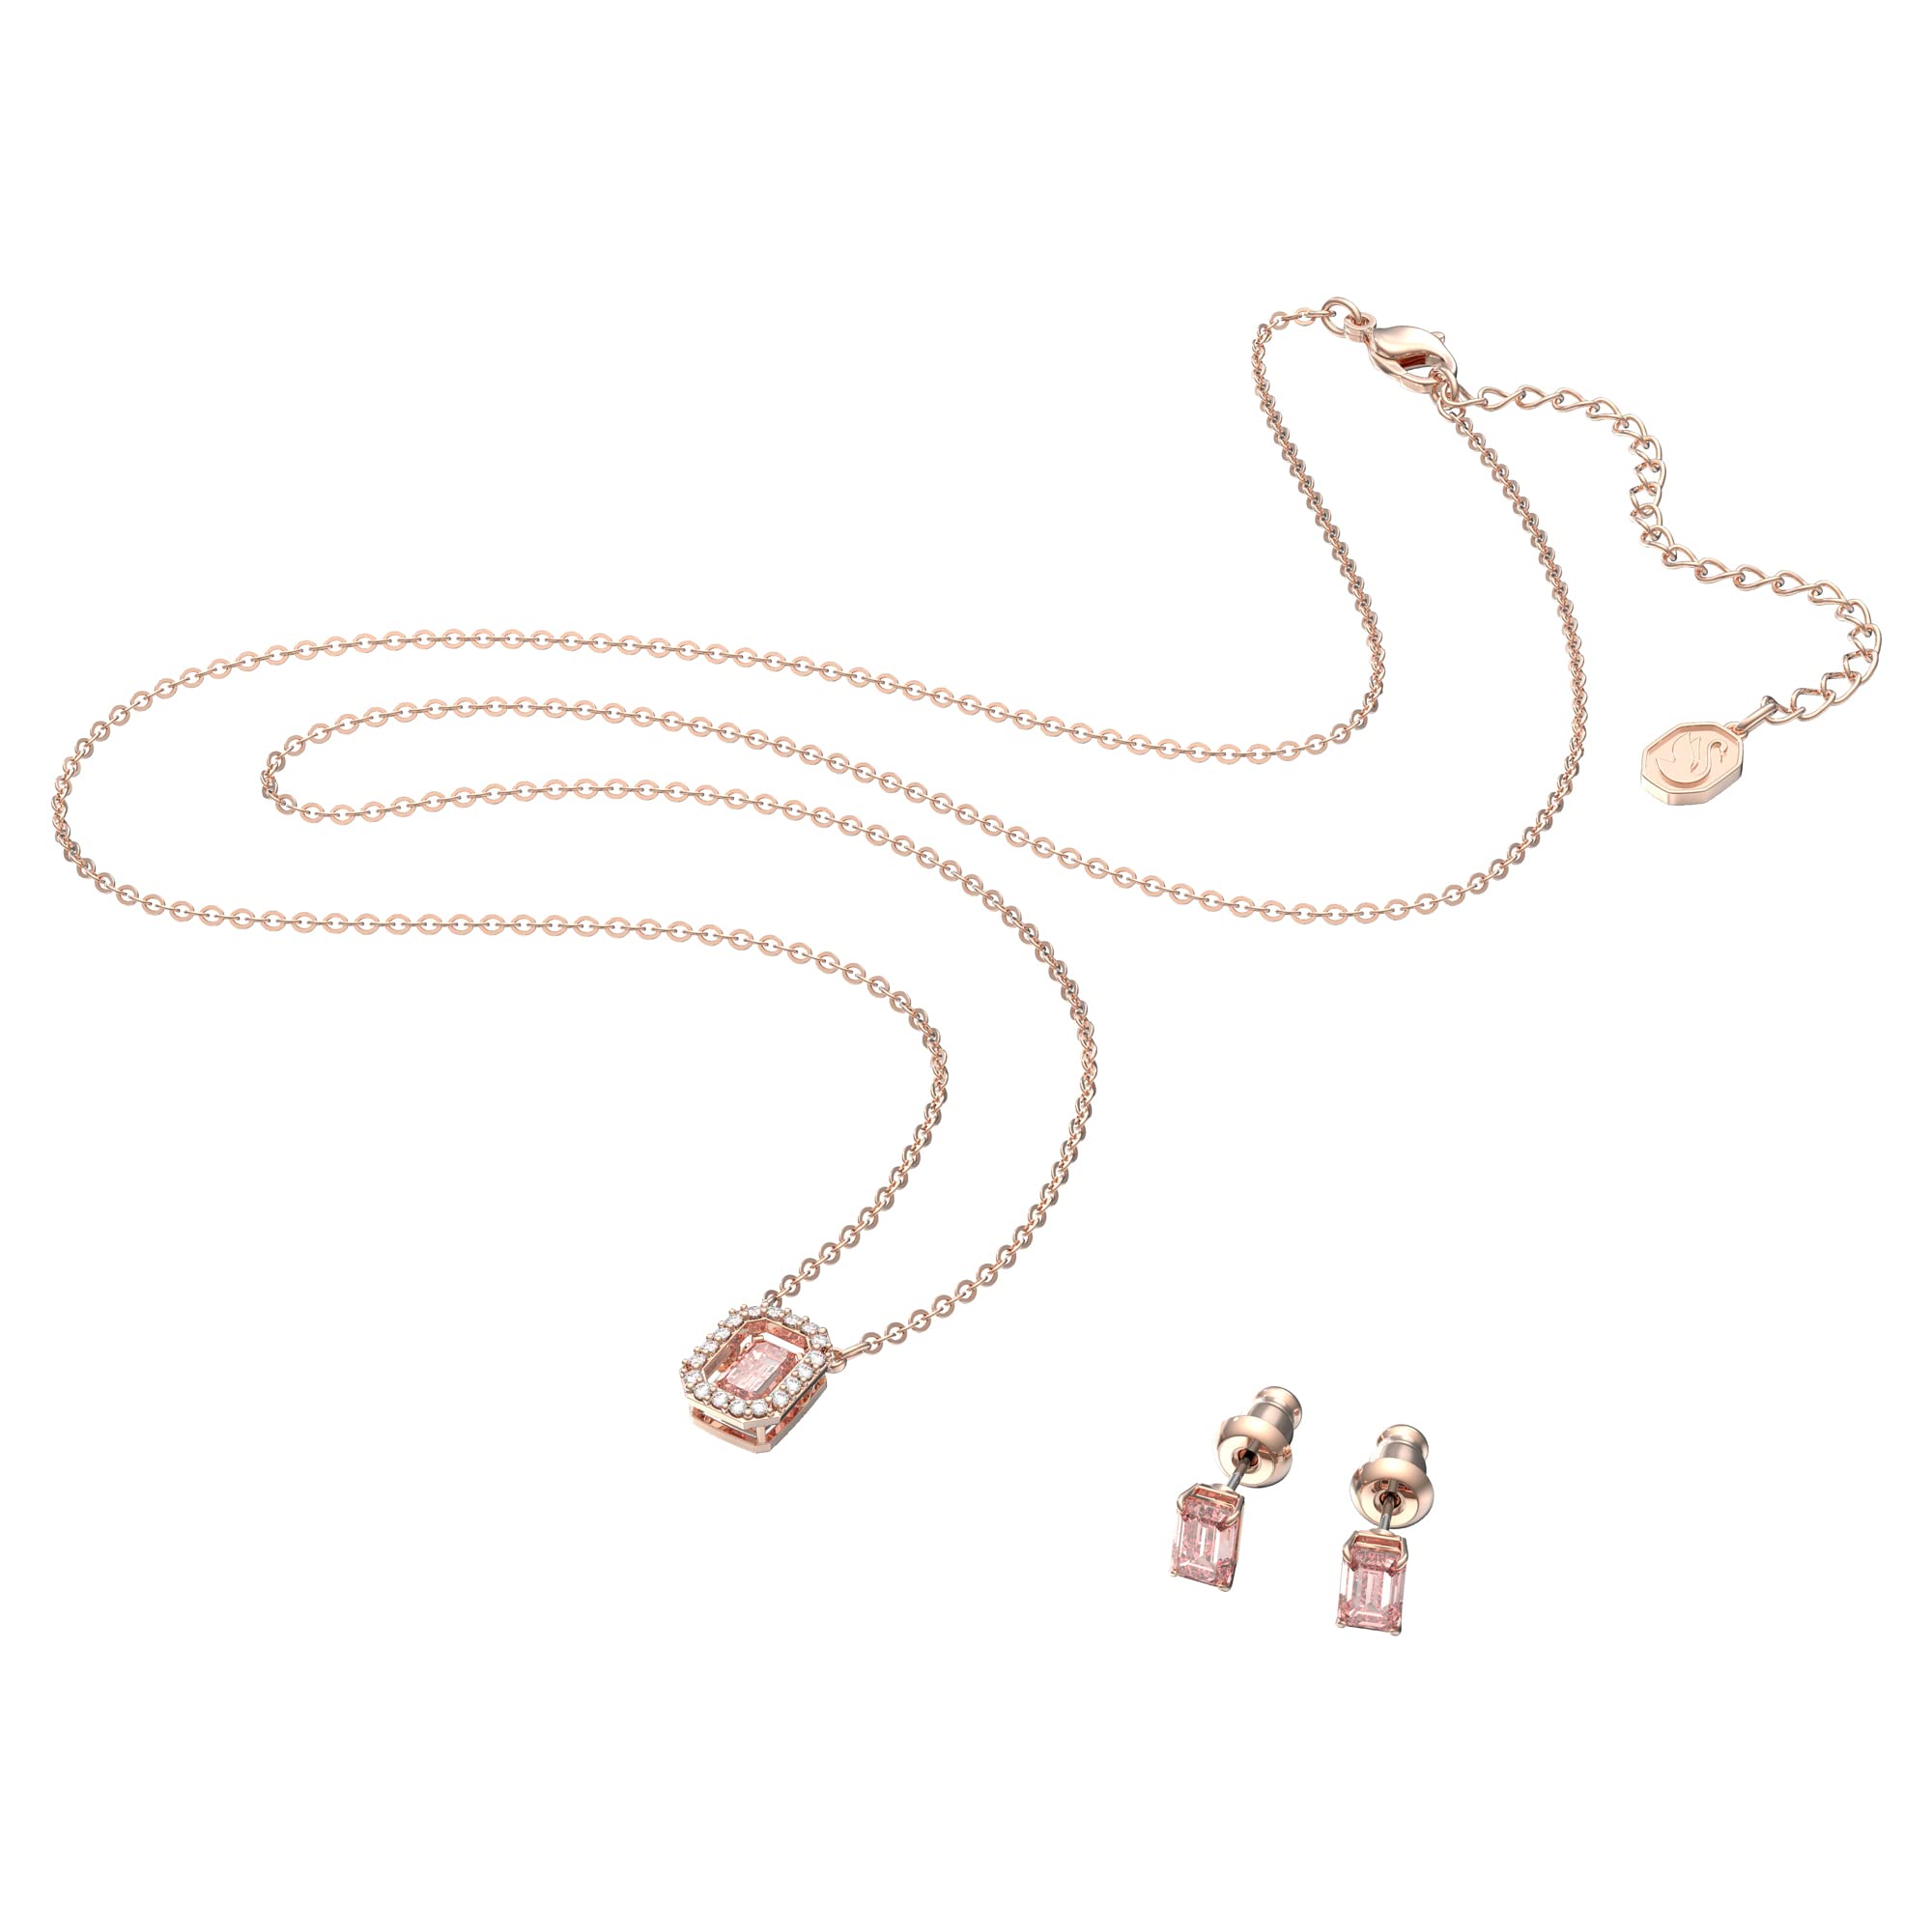 SWAROVSKI Millenia Crystal Jewelry Set Collection, Pink and Rose-Gold Crystals